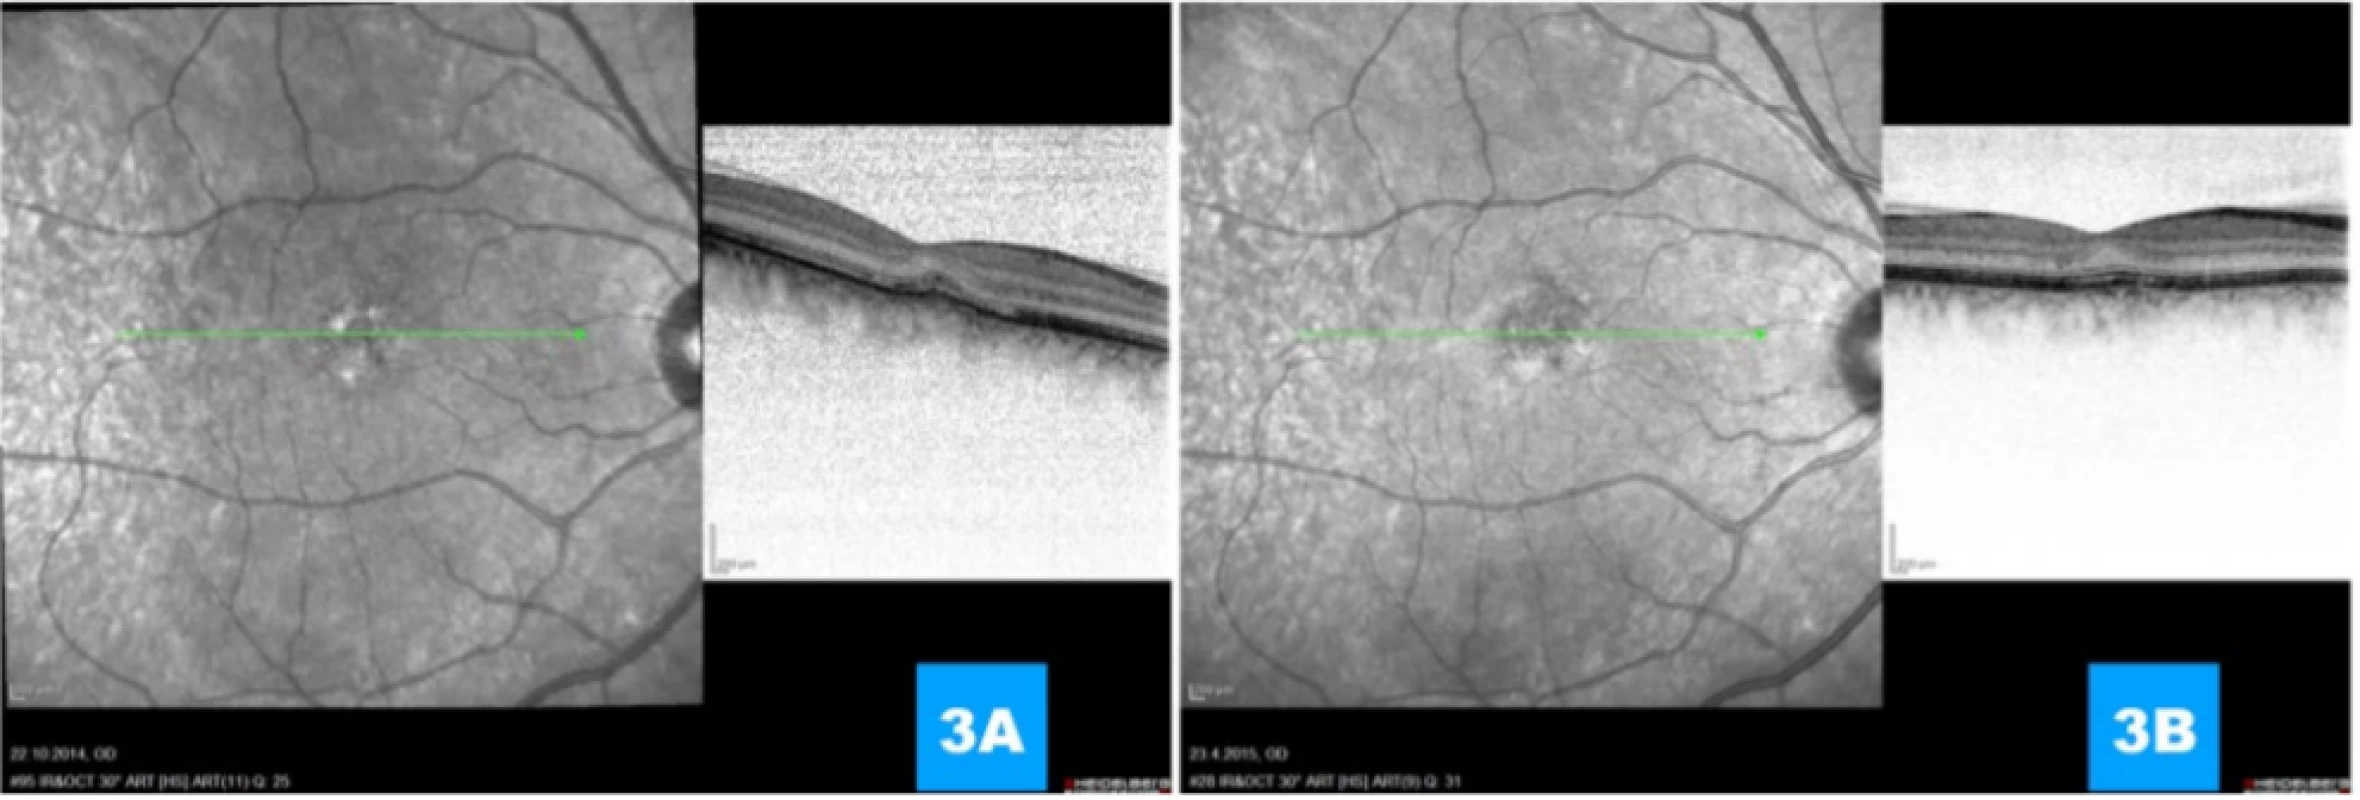  (A, B) Progressive absolute regression of classic portion, regression of subretinal fluid, preservation of membrana limitans
externa, renewal of interdigitation zone and intimation of extirpation of line of retinal pigment epithelium 1 month and 1 year
respectively after application of anti-VEGF agent 